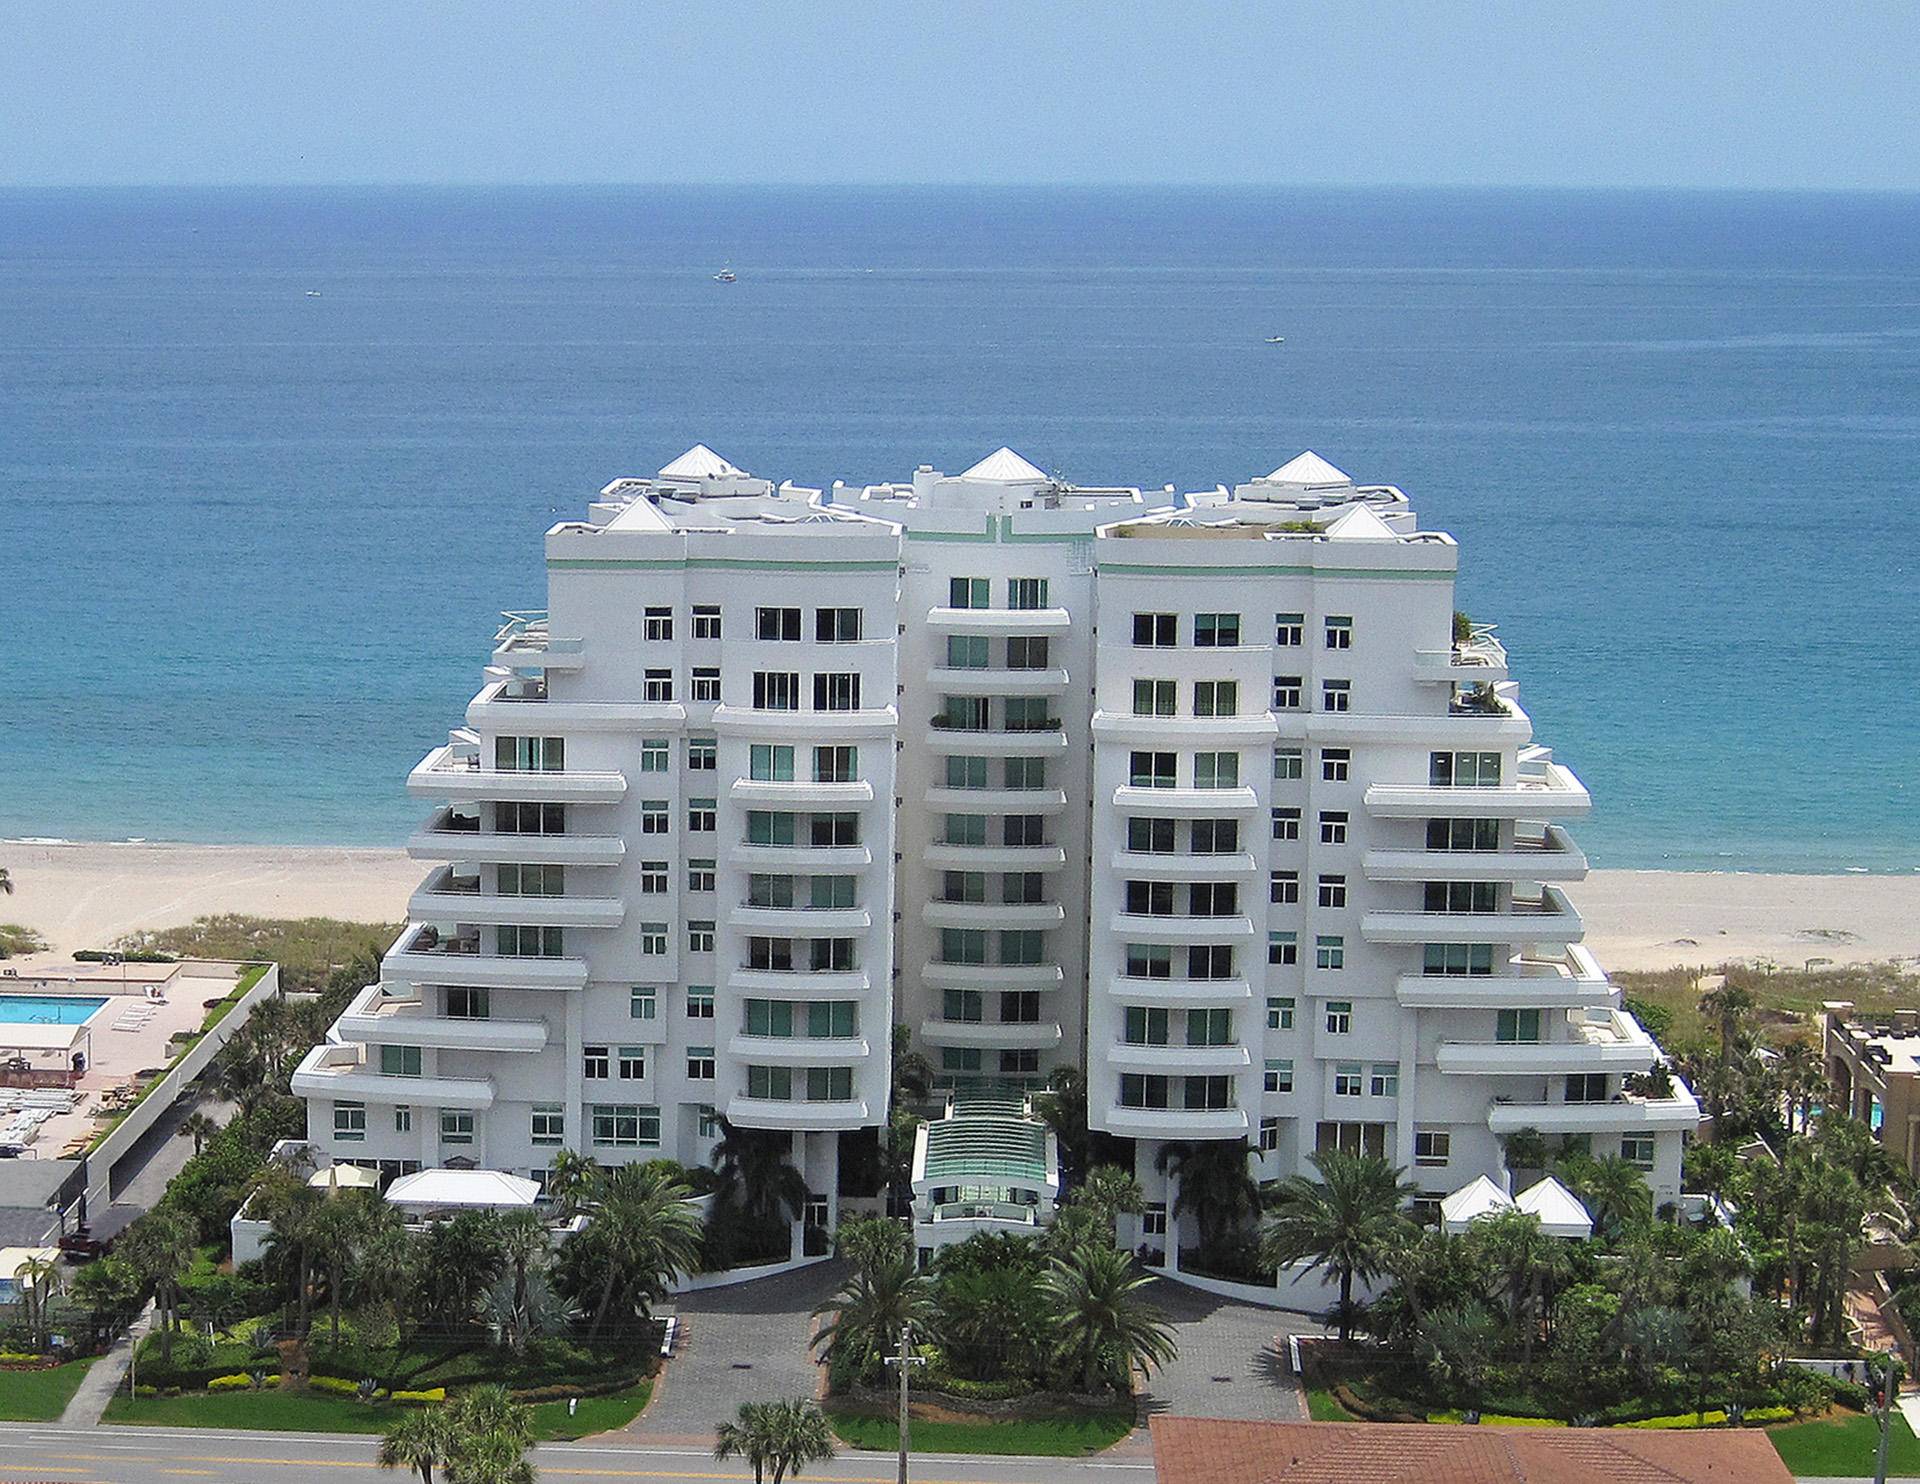 CUSTOM DESIGNED DIRECT OCEANFRONT FULLY FURNISHED 4 BEDROOM DOUBLE RESIDENCE AT THE ARAGON WITH OCEAN FRONT CABANA.